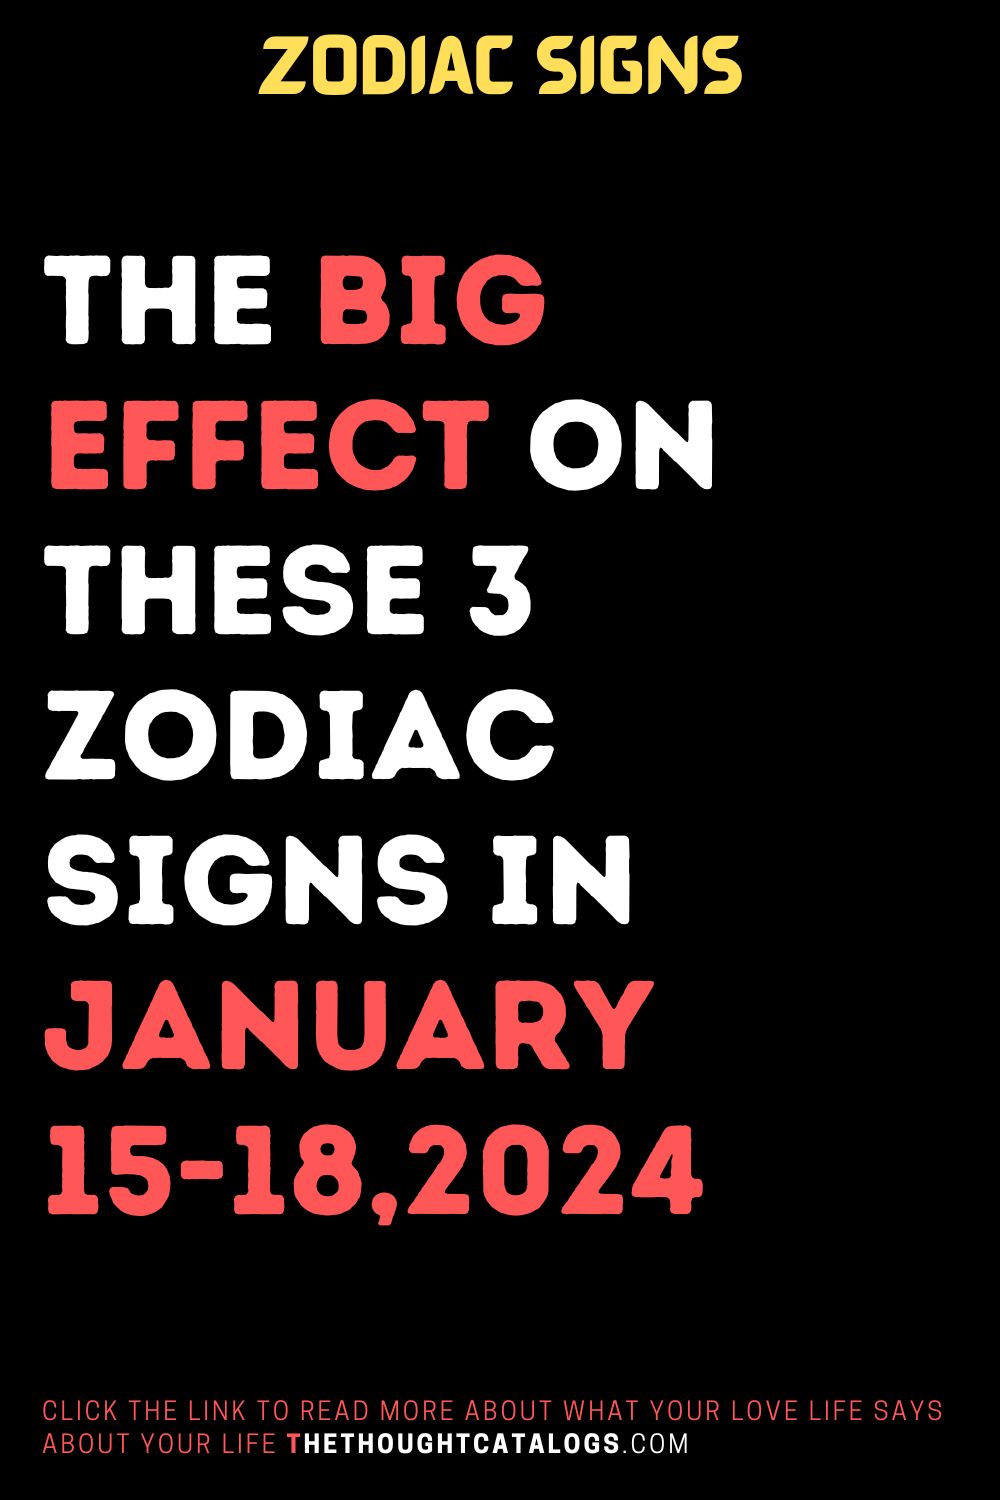 The Big Effect On These 3 Zodiac Signs In January 15-18,2024